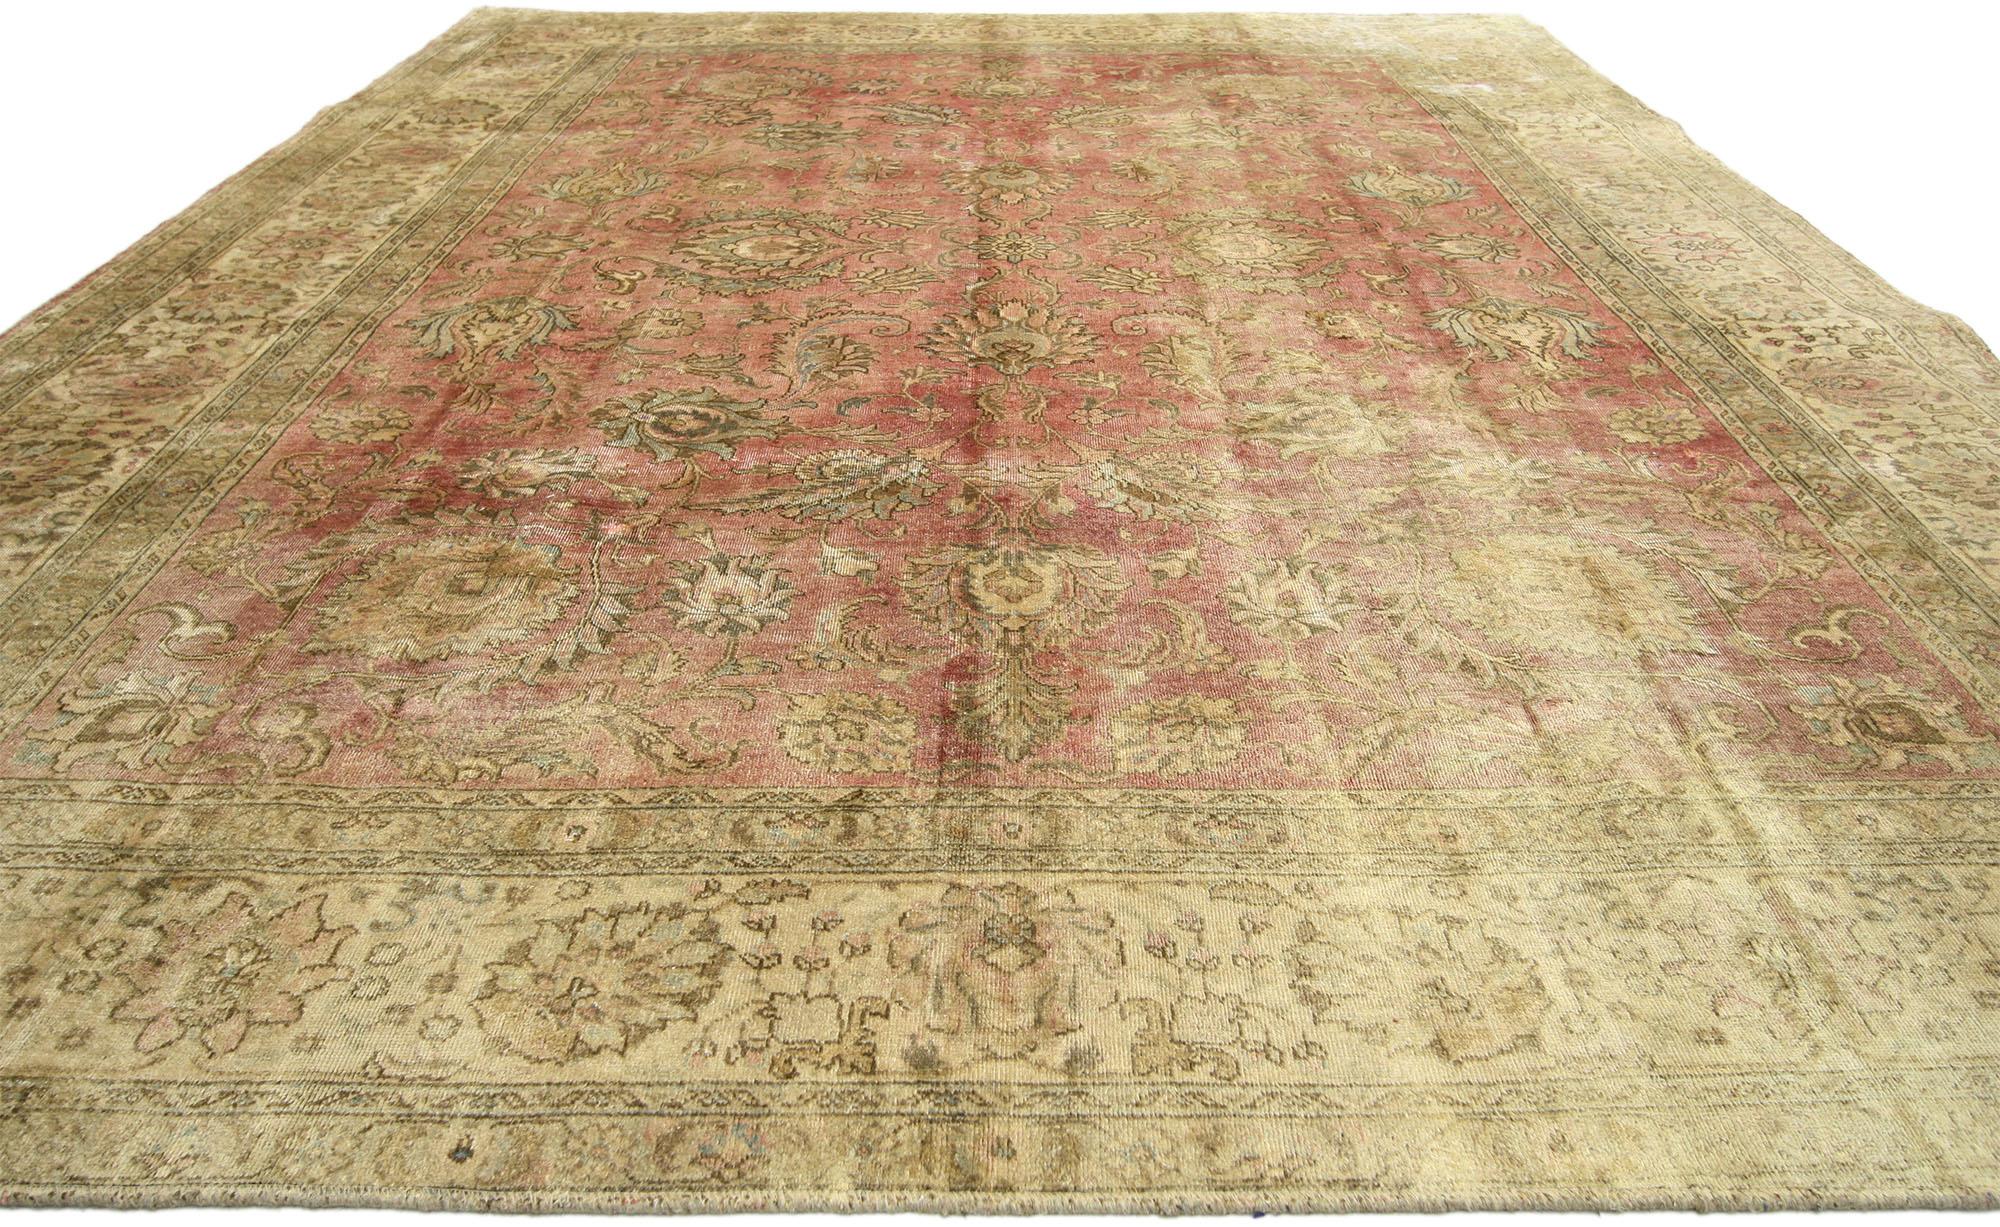 Turkish Distressed Antique Persian Tabriz Rug Industrial Rustic Style For Sale